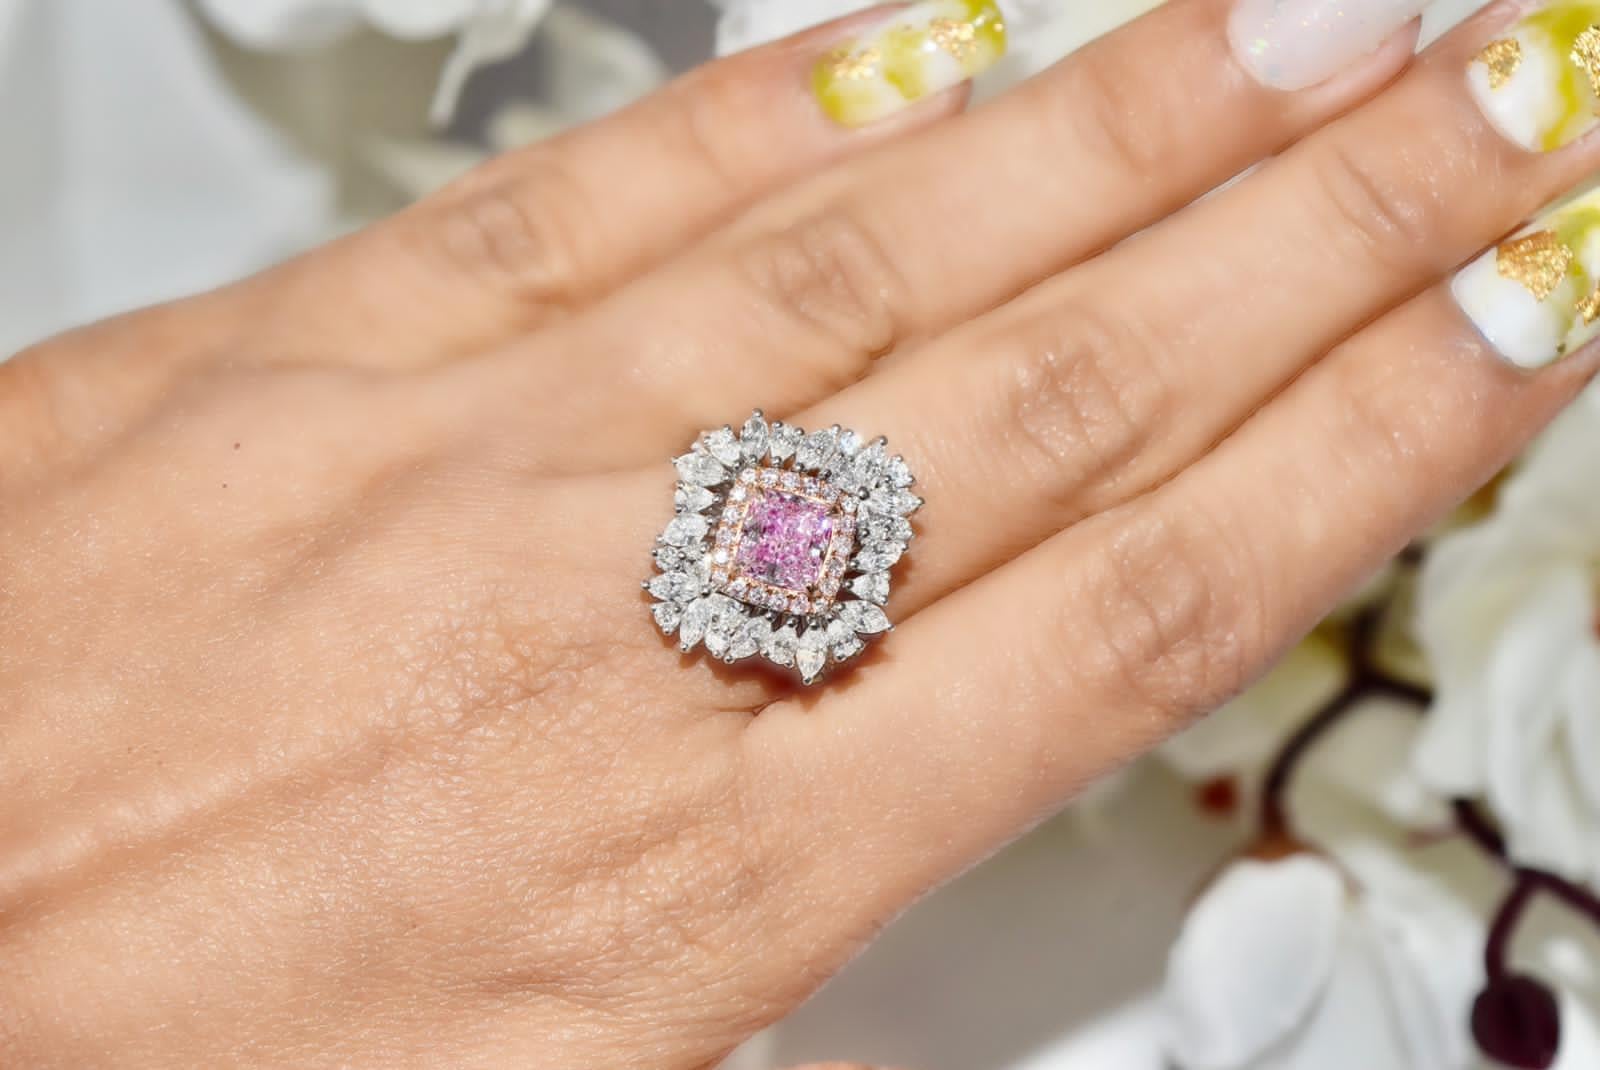 **100% NATURAL FANCY COLOUR DIAMOND JEWELLERY**

✪ Jewellery Details ✪

♦ MAIN STONE DETAILS

➛ Stone Shape: Cushion
➛ Stone Color: Faint Pink
➛ Stone Weight: 1.21 carats
➛ Clarity: SI2
➛ GIA certified

♦ SIDE STONE DETAILS

➛ Side White diamonds -